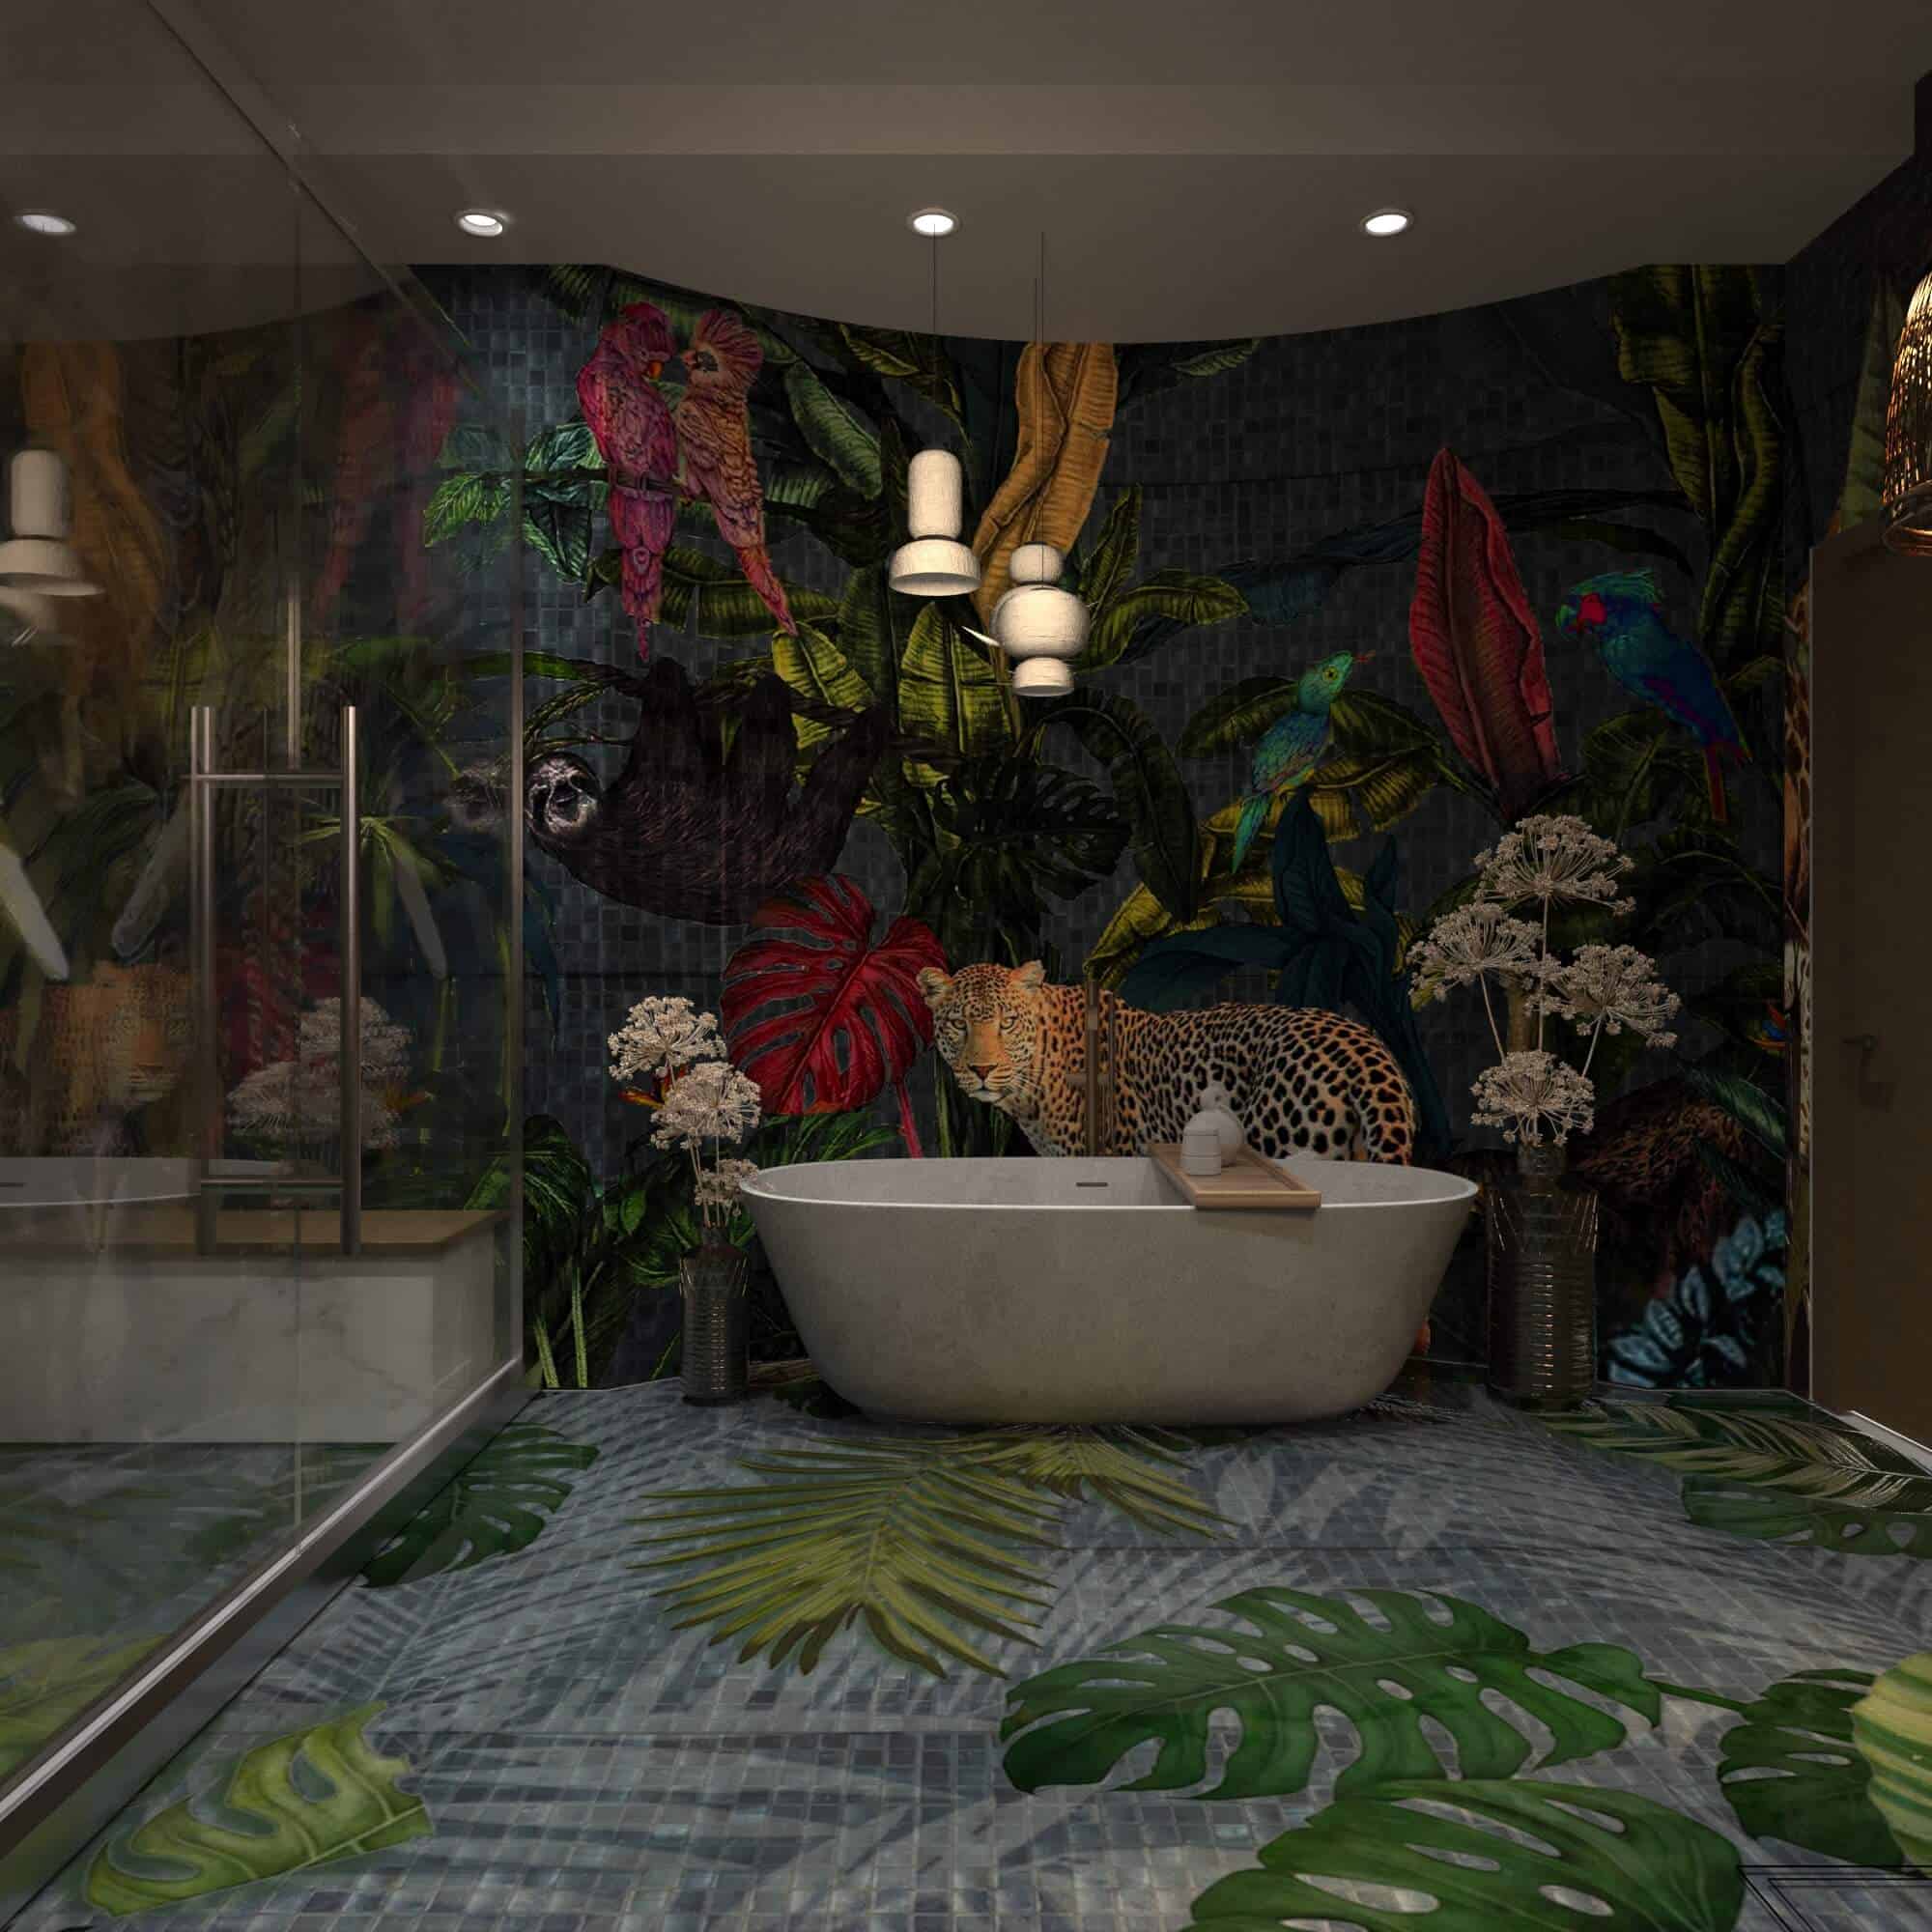 A mosaic wall art featuring a majestic elephant, exotic birds, and tropical foliage in a contemporary bathroom setting.